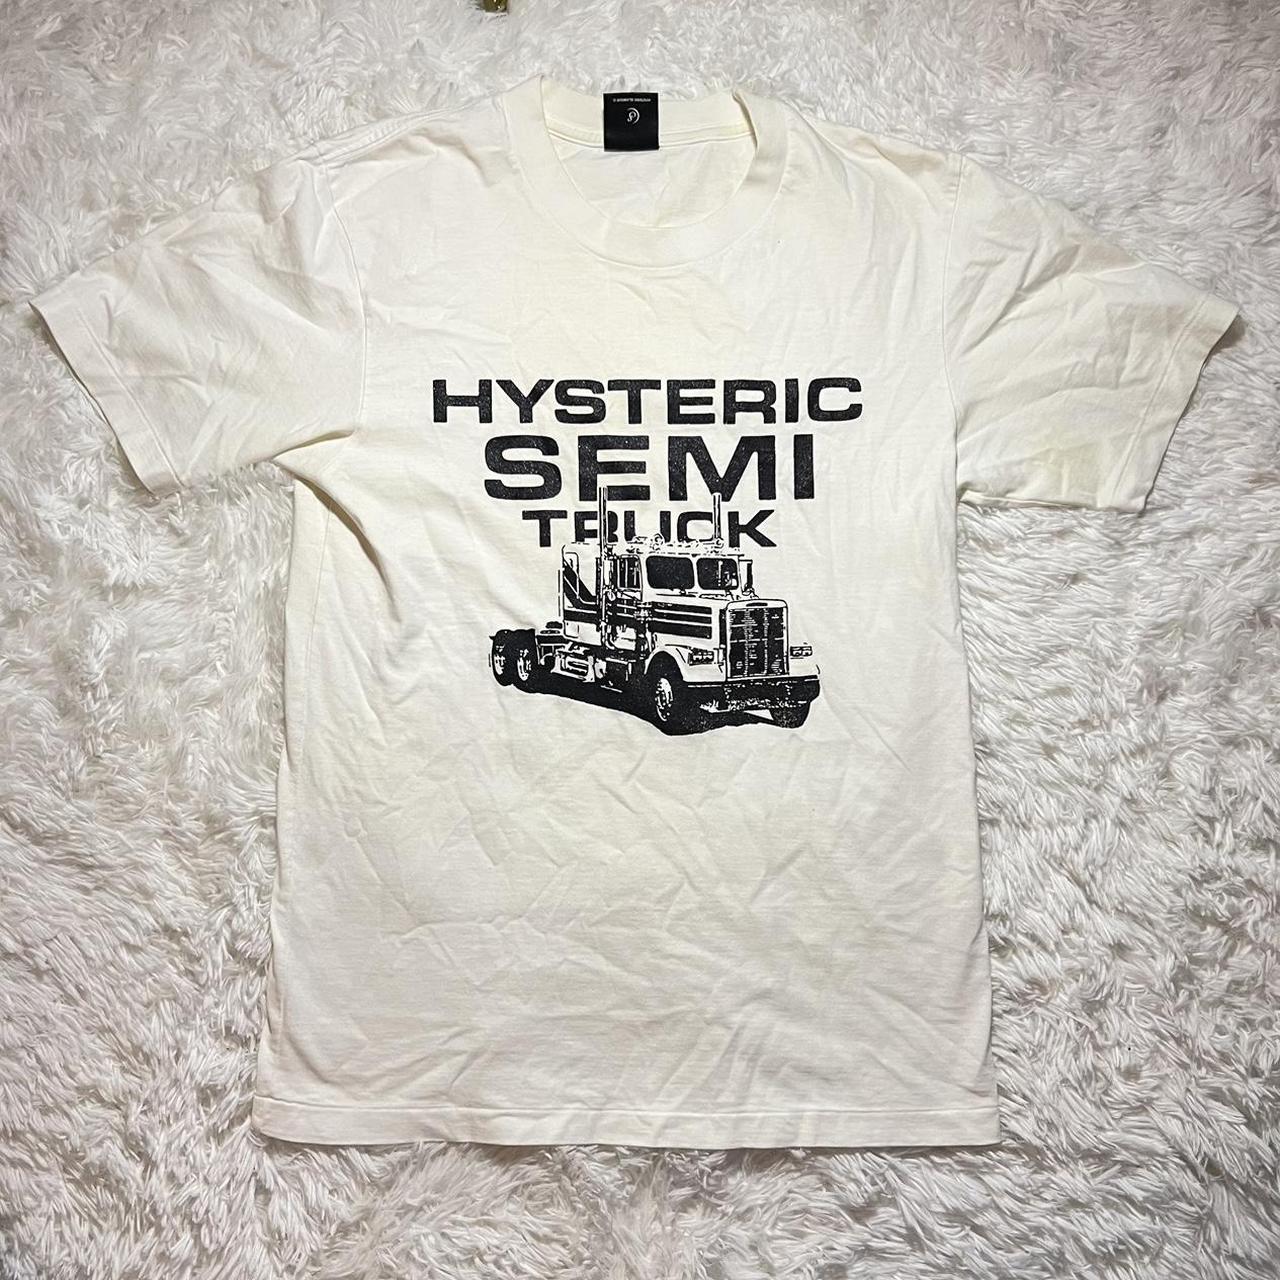 Hysteric Glamour Men's Black and White T-shirt (2)